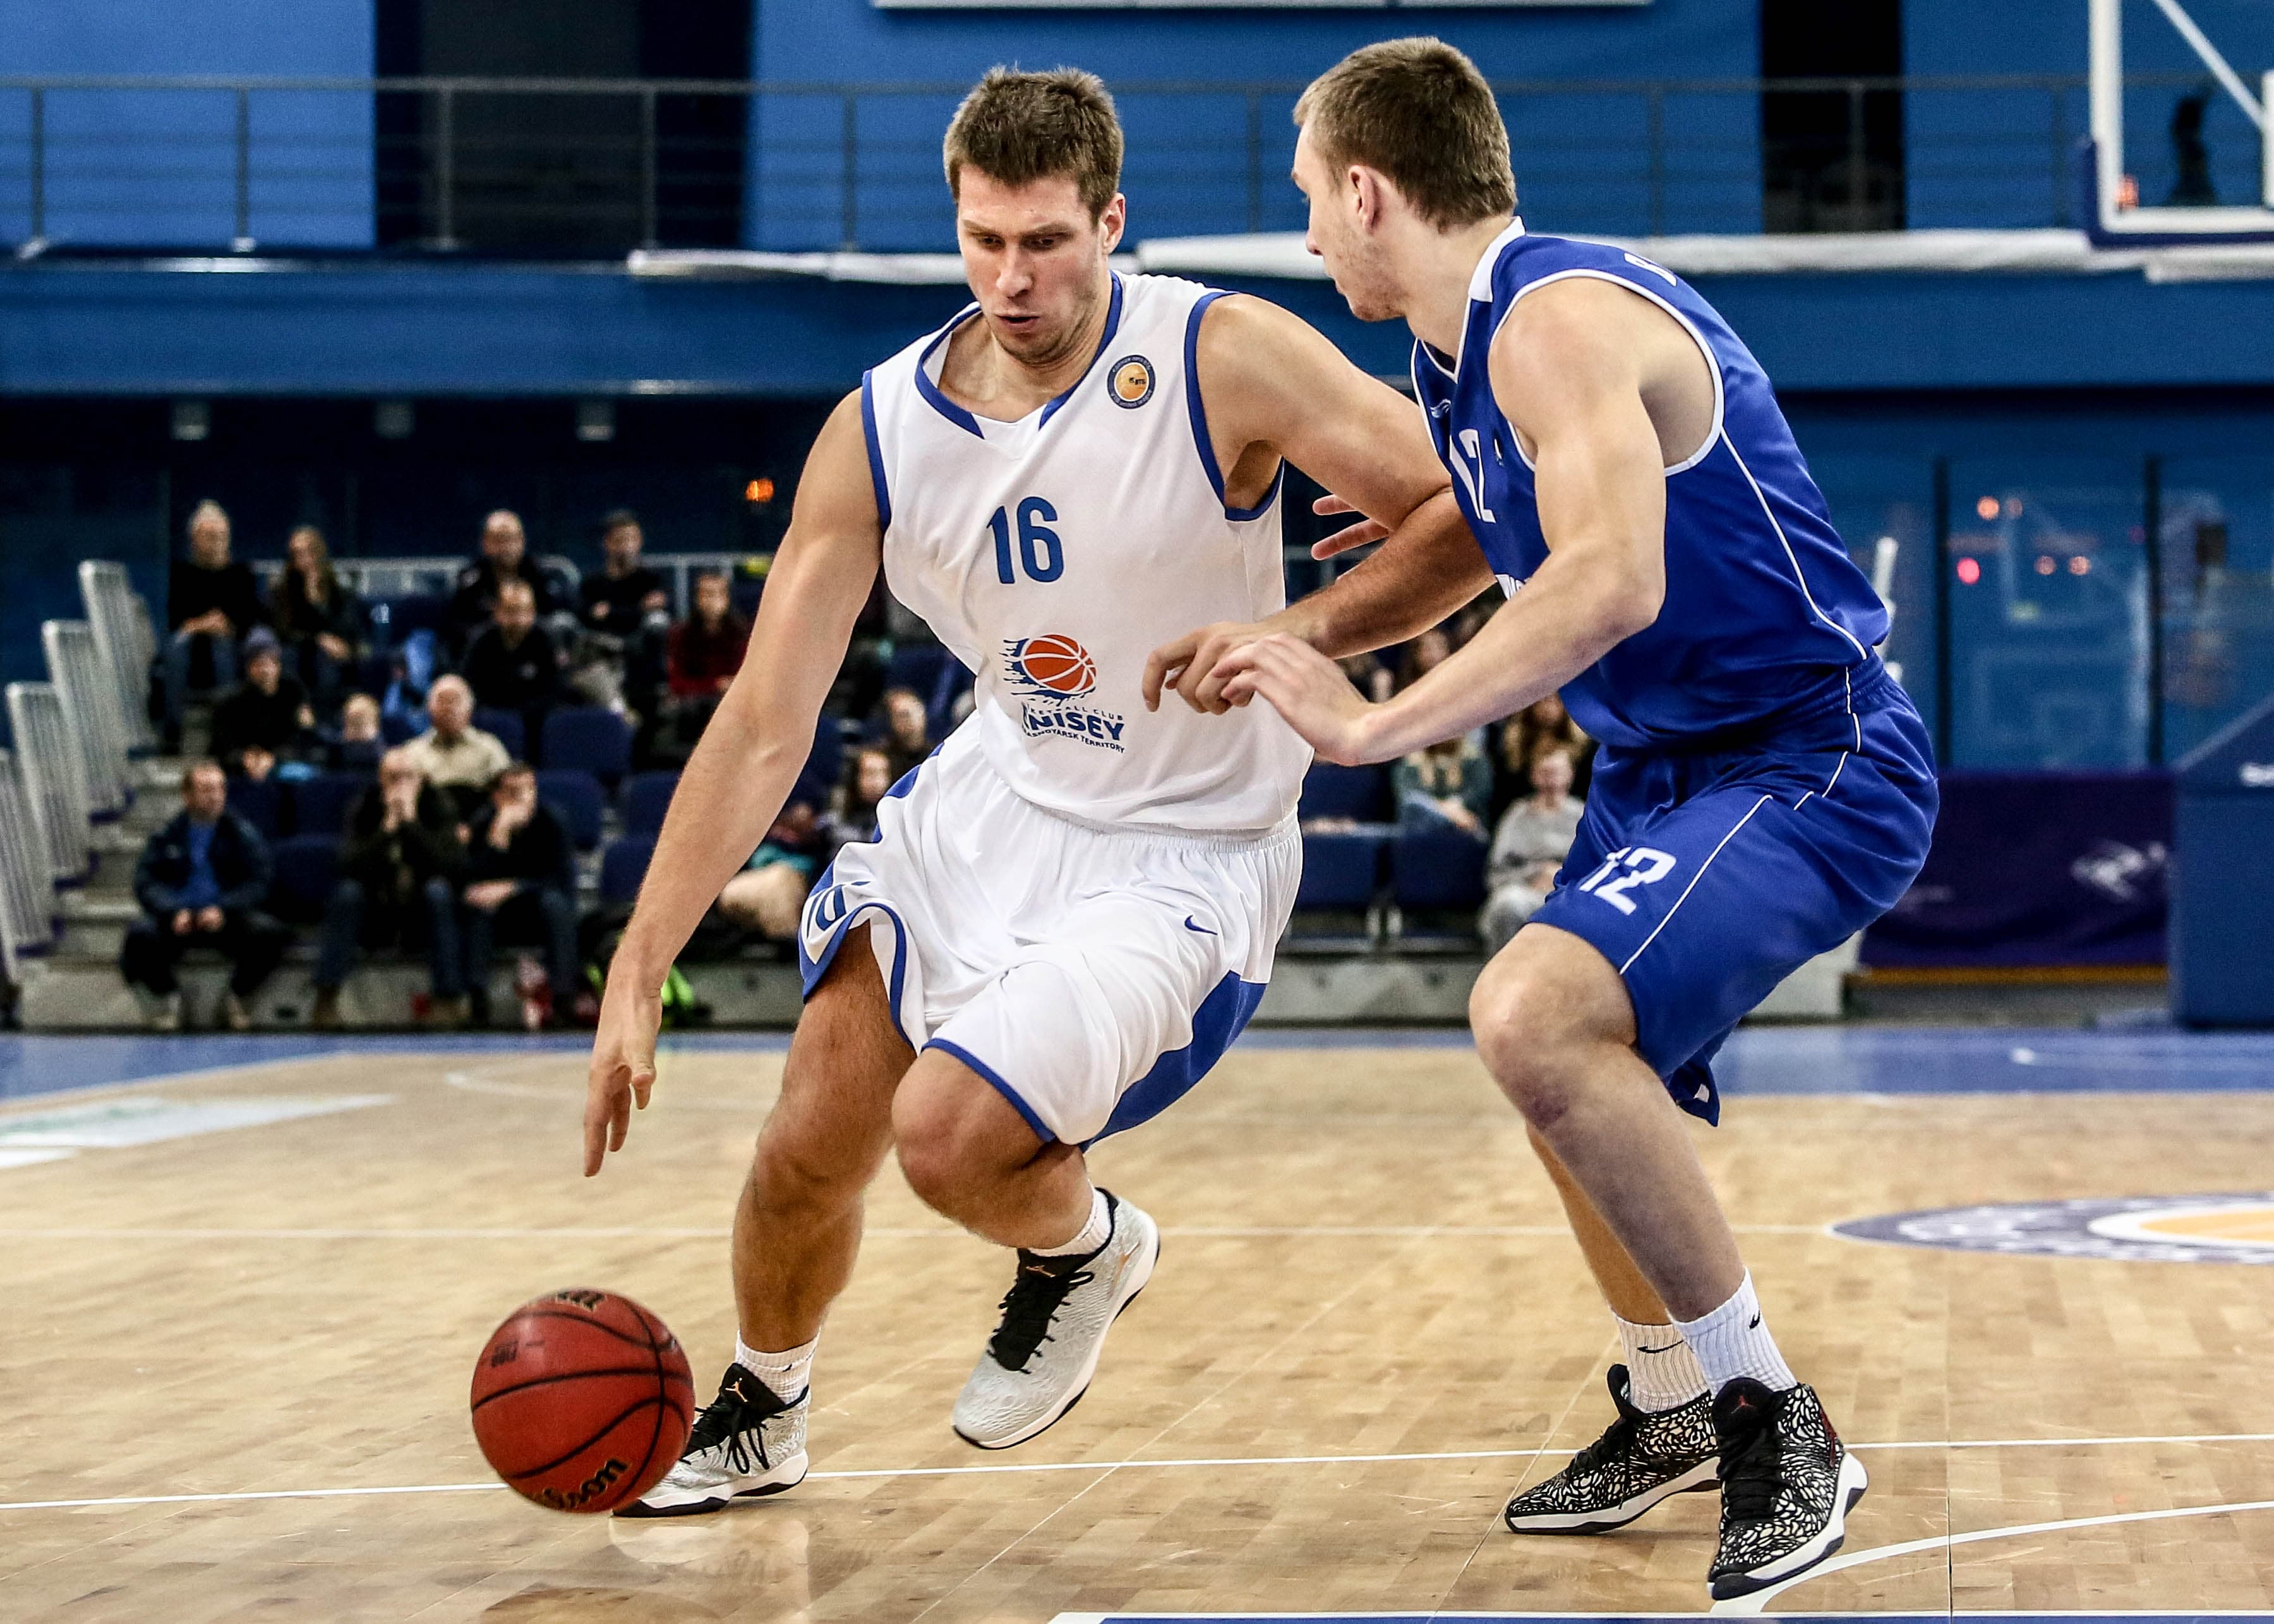 Enisey Counters Dragons